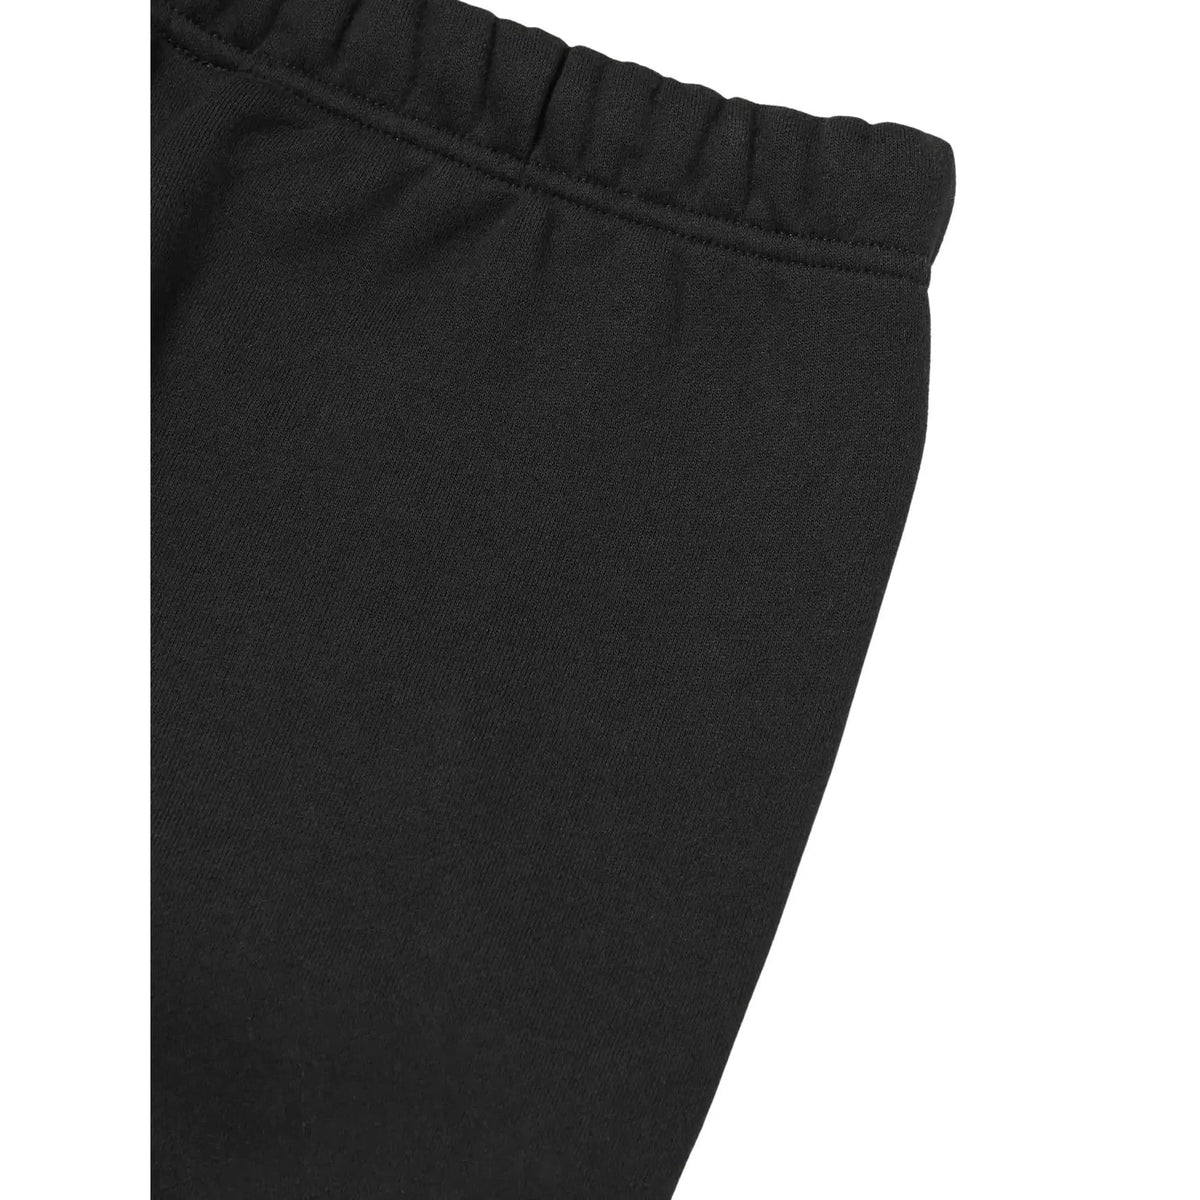 FEAR OF GOD ESSENTIALS STRETCH LIMO SWEATPANTS (SS22)